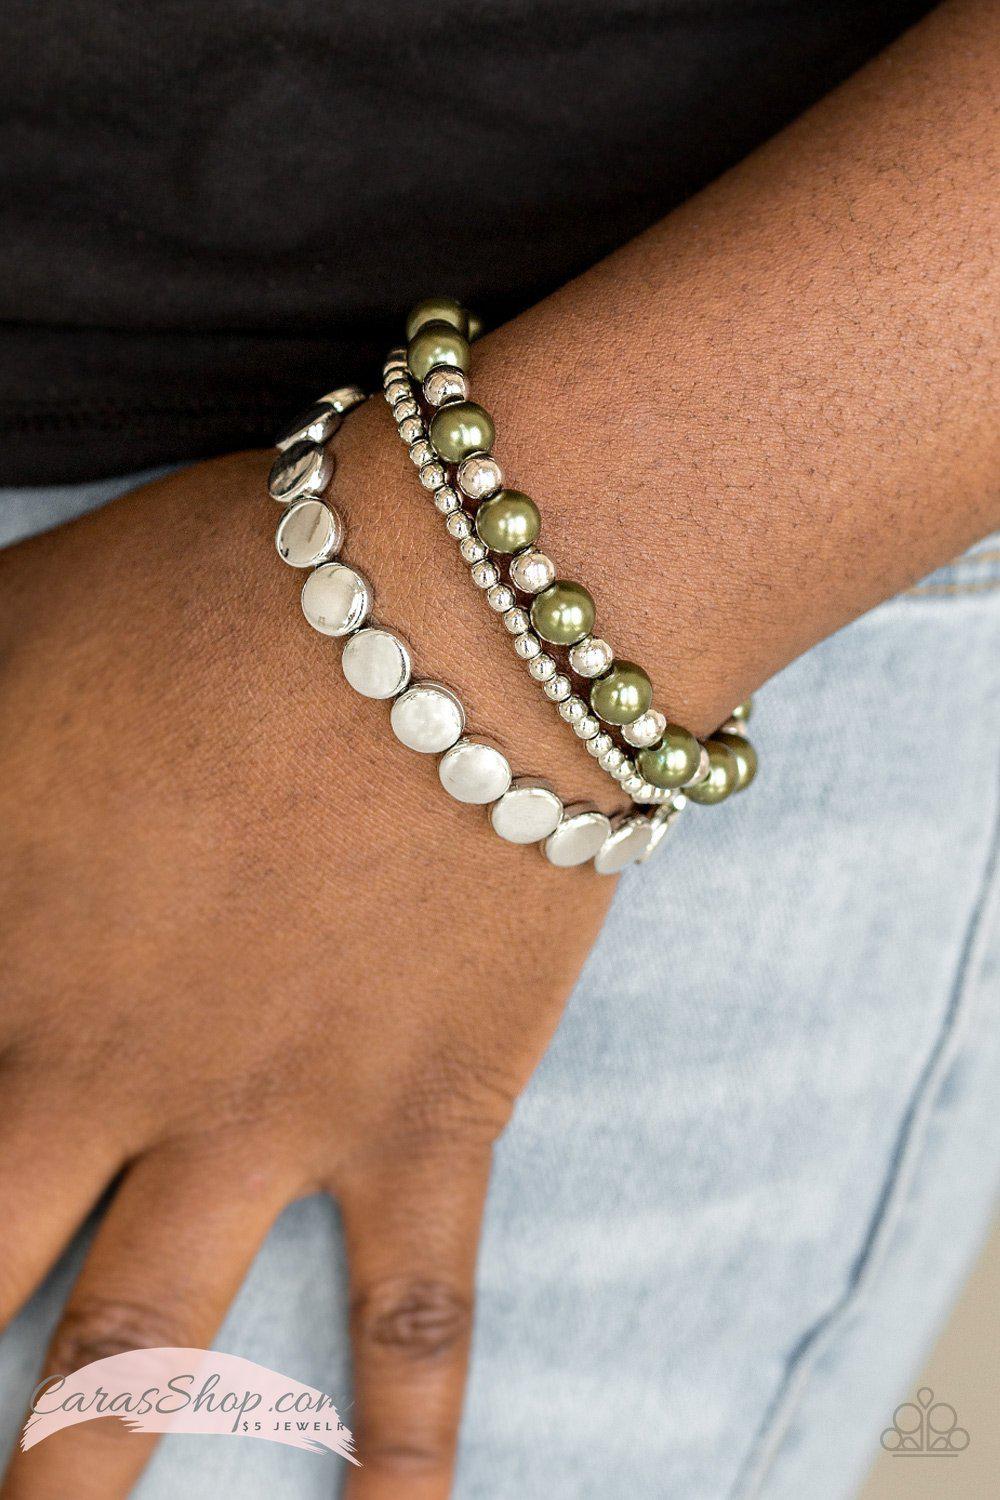 Girly Girl Glamour Green and Silver Stretch Bracelet Set - Paparazzi Accessories-CarasShop.com - $5 Jewelry by Cara Jewels